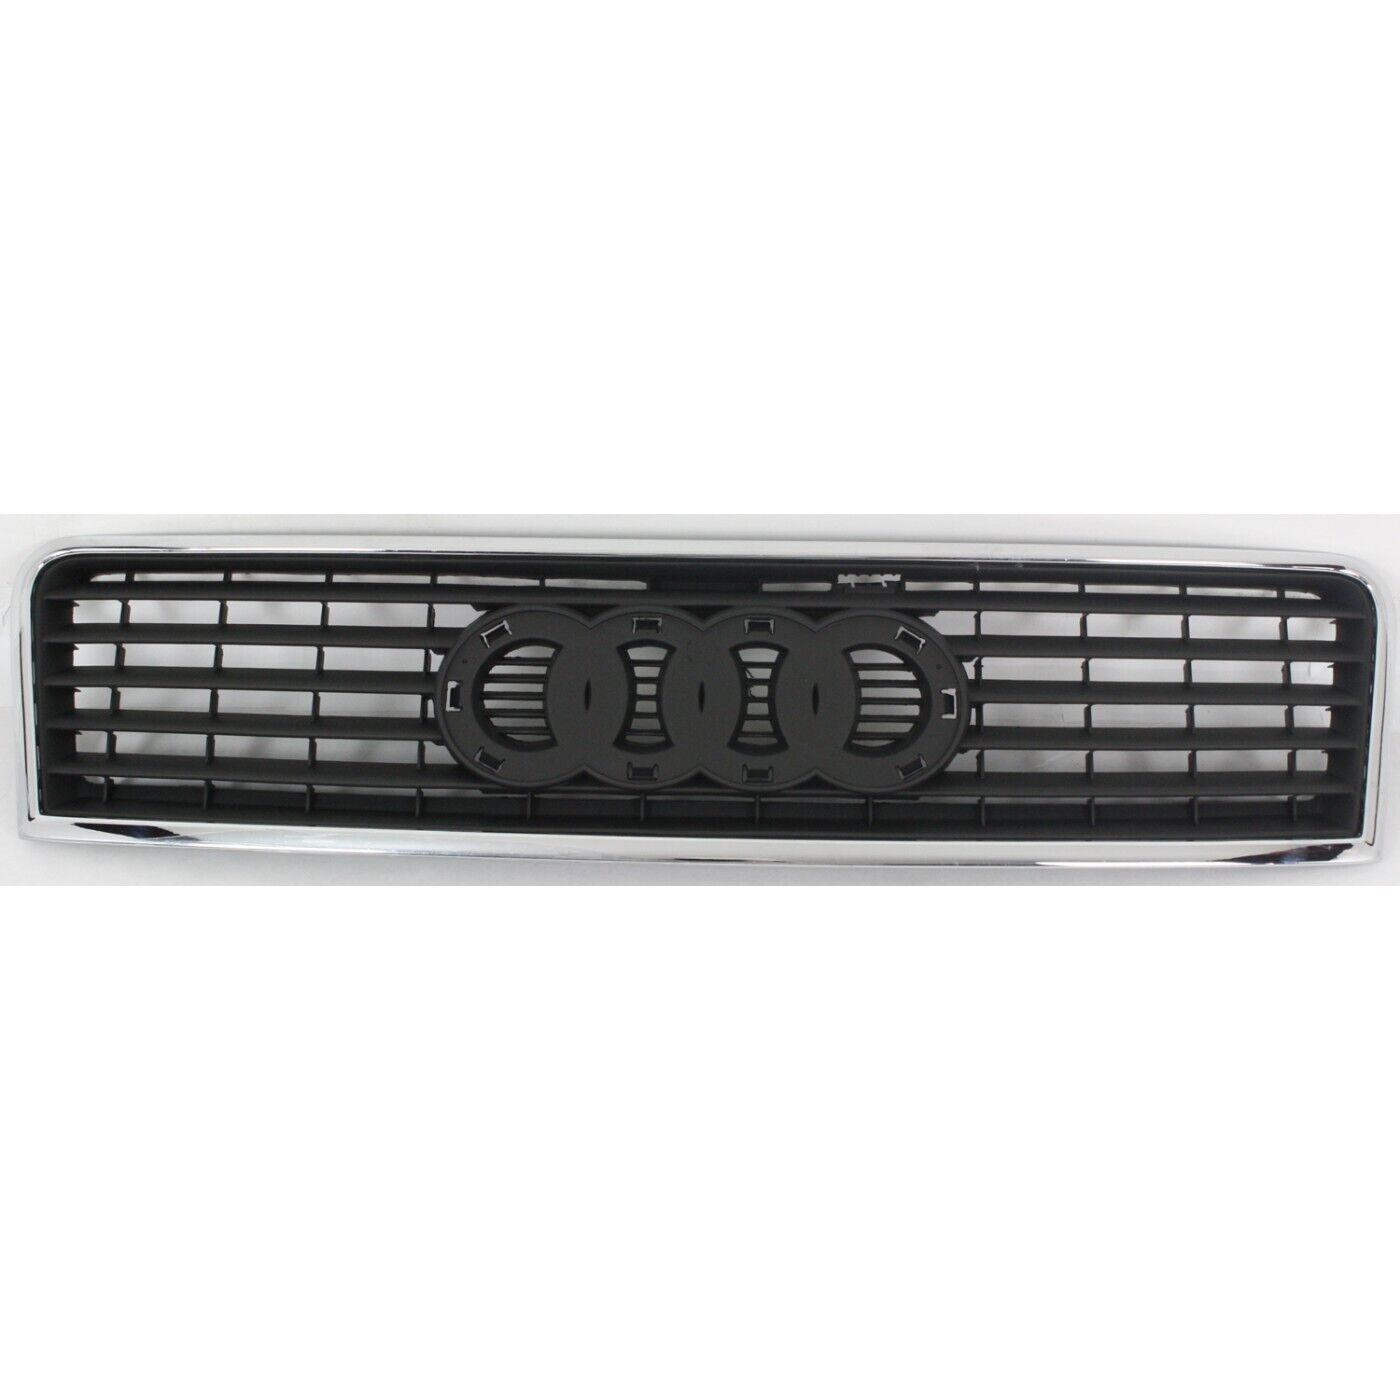 Grille For 2002-2004 Audi A6 Quattro A6 Chrome Shell w/ Primed Insert Plastic